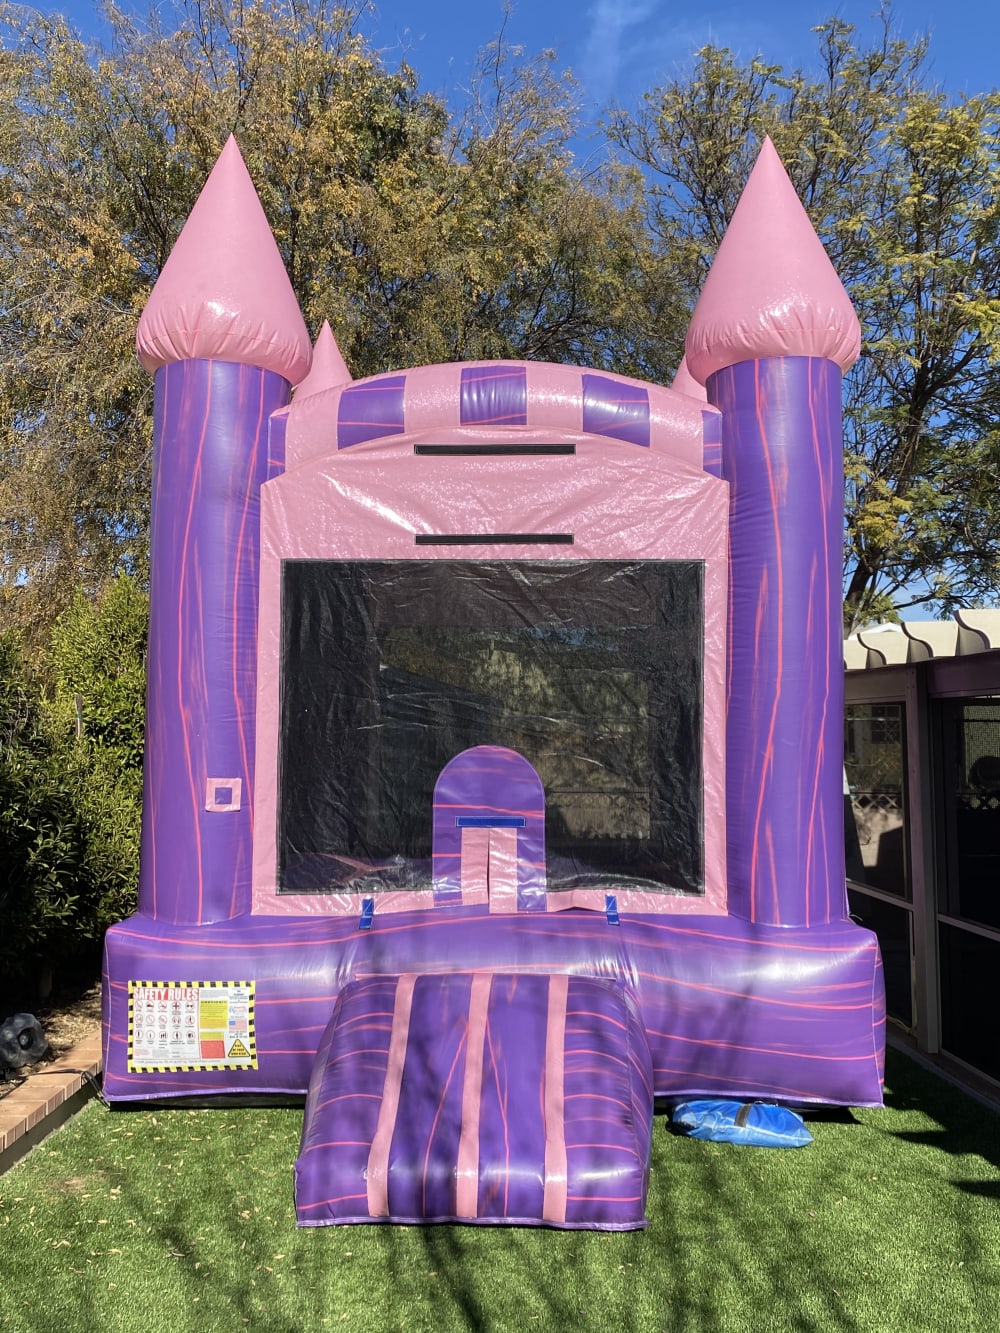 Bounce Houses, Waterslides, Laser Tag, Party Rentals in Corona, Eastvale,  Riverside, Chino Hills, Yorba Linda, Anahiem Hills. - Penguin Party Rentals